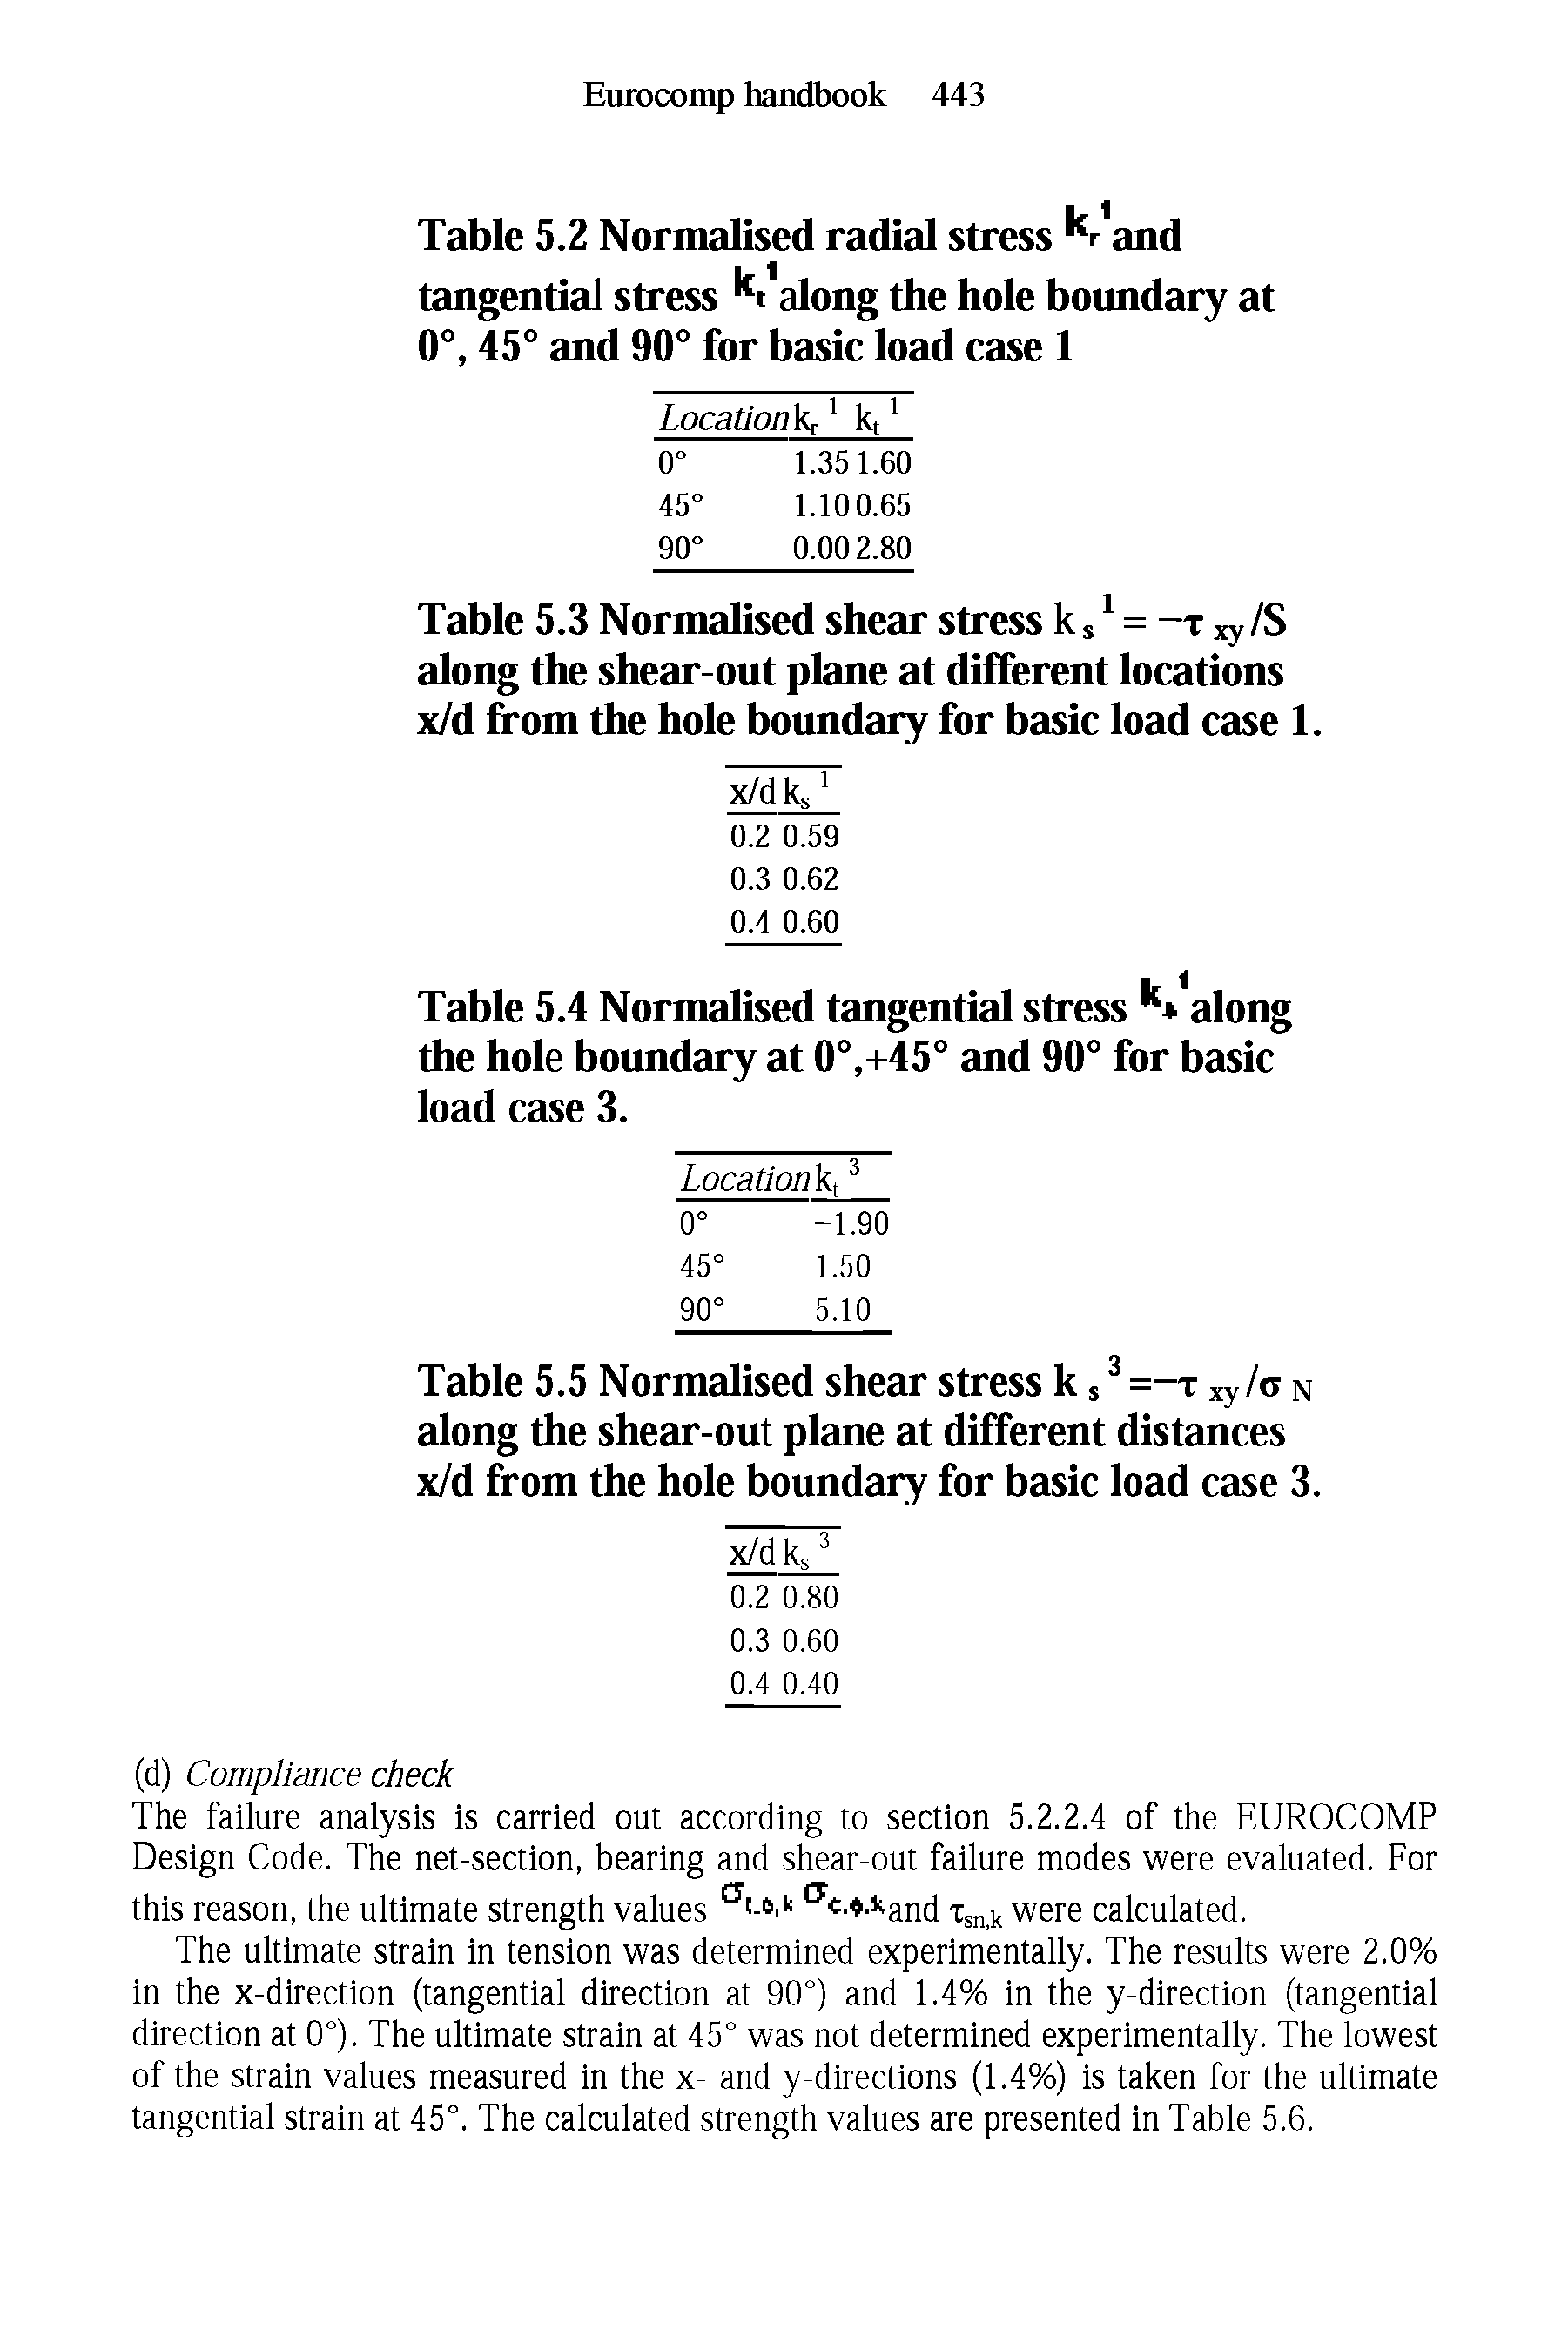 Table 5.5 Normalised shear stress k =-r xy/o n along the shear-out plane at different distances x/d from the hole boundary for basic load case 3.